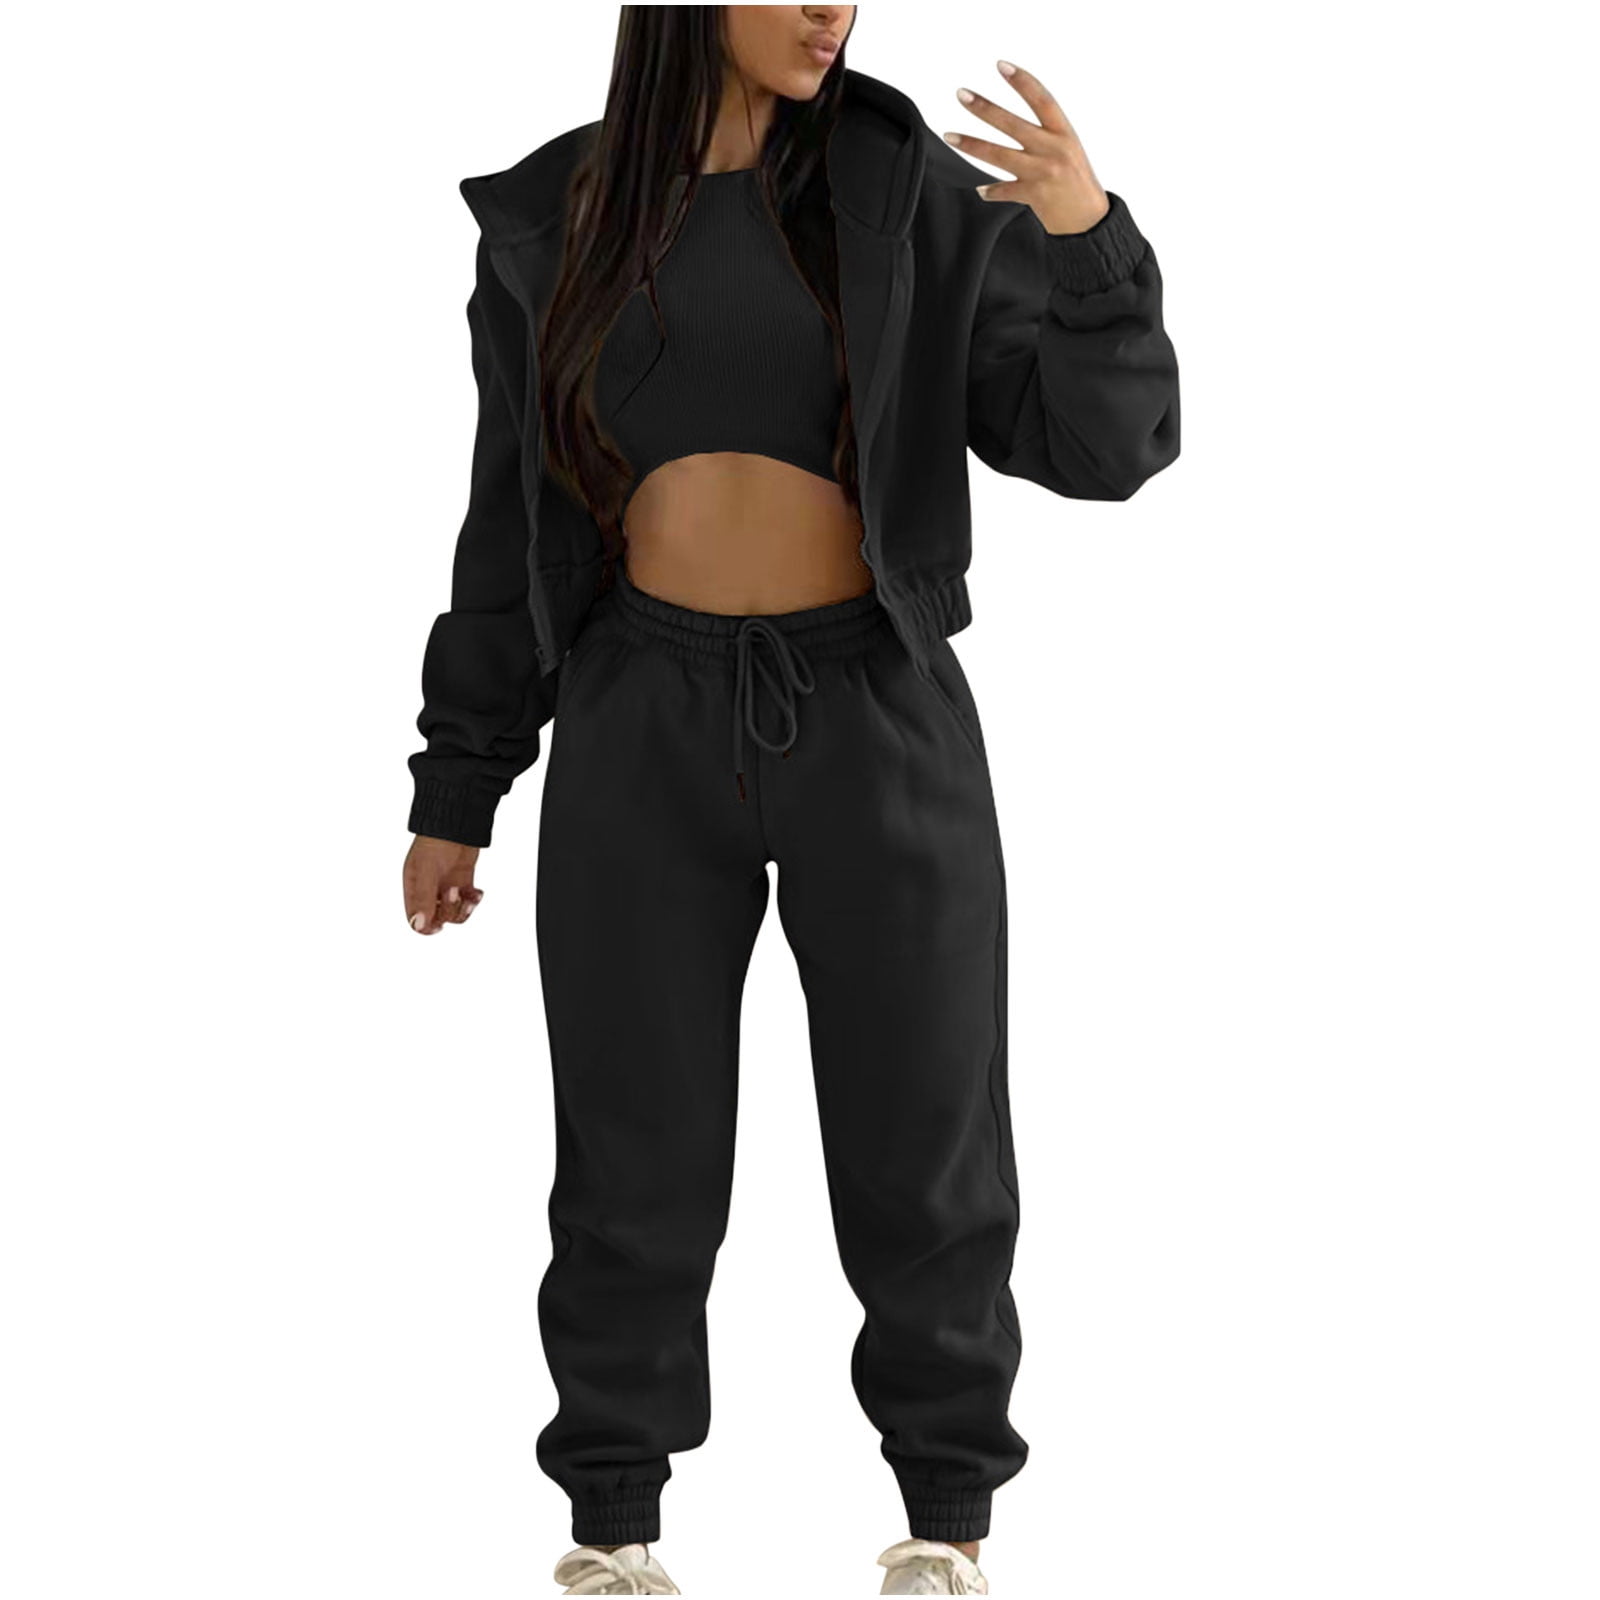 Amtdh Trendy Sweatsuit for Womens Clearance Solid Zipper Hooded Fleece ...